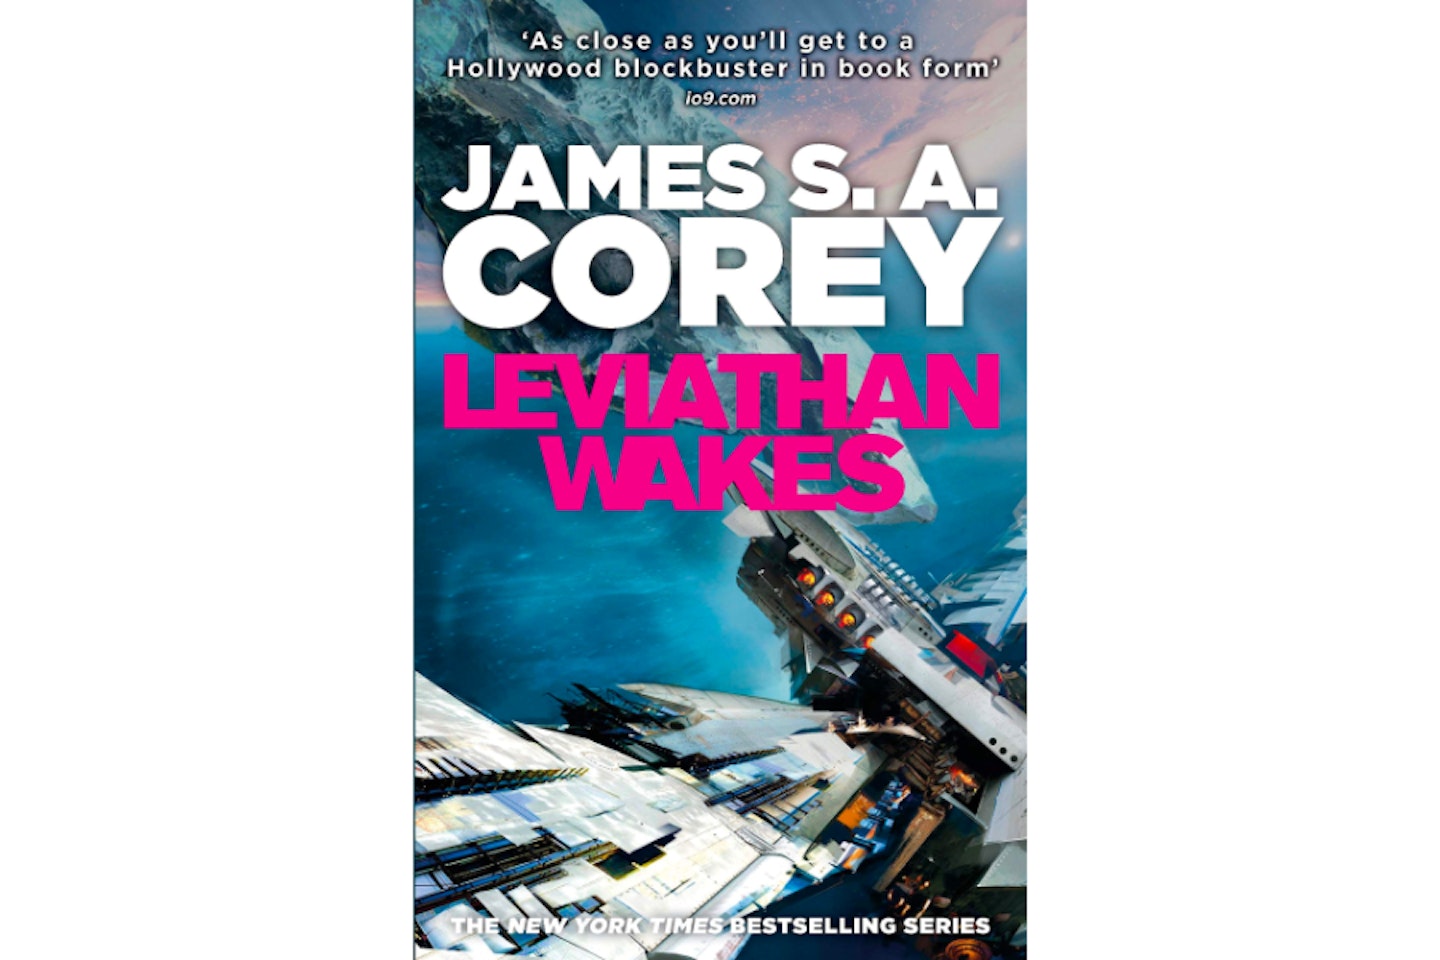 Leviathan Wakes (Expanse, Book One) by James S.A Corey, 2011